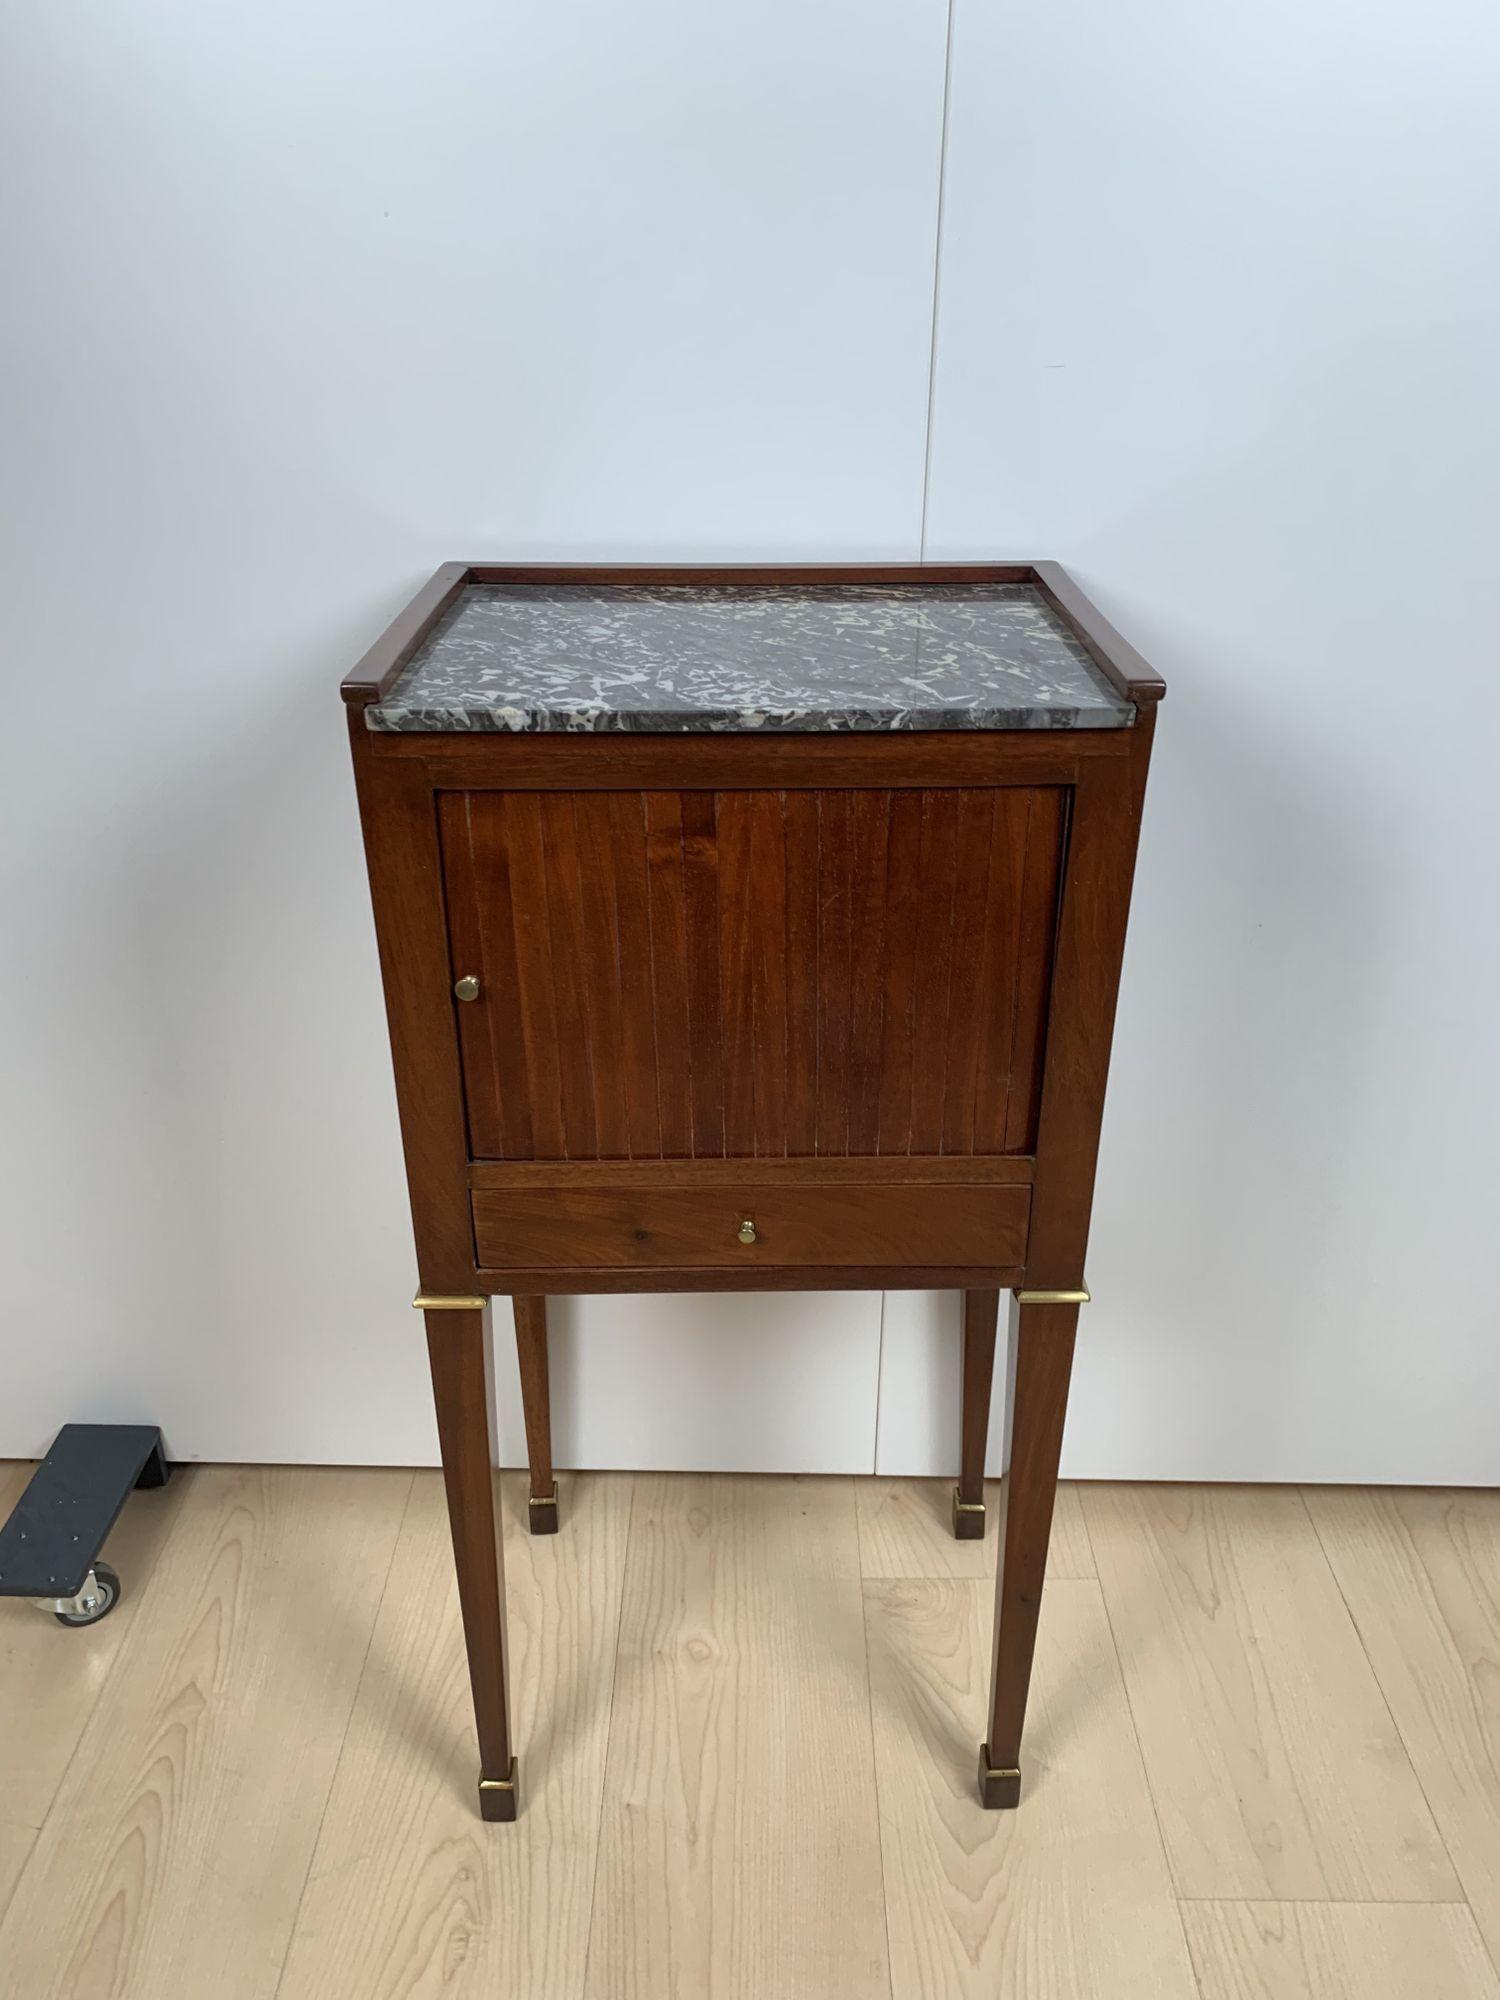 Beautiful Biedermeier / french Restoration period Nightstand, or small furniture from France circa 1820.

Mahogany veneered and solid. Conical square legs with two brass rings per leg. 1 roller lock and 1 drawer. Veneered on 4 sides and therefore